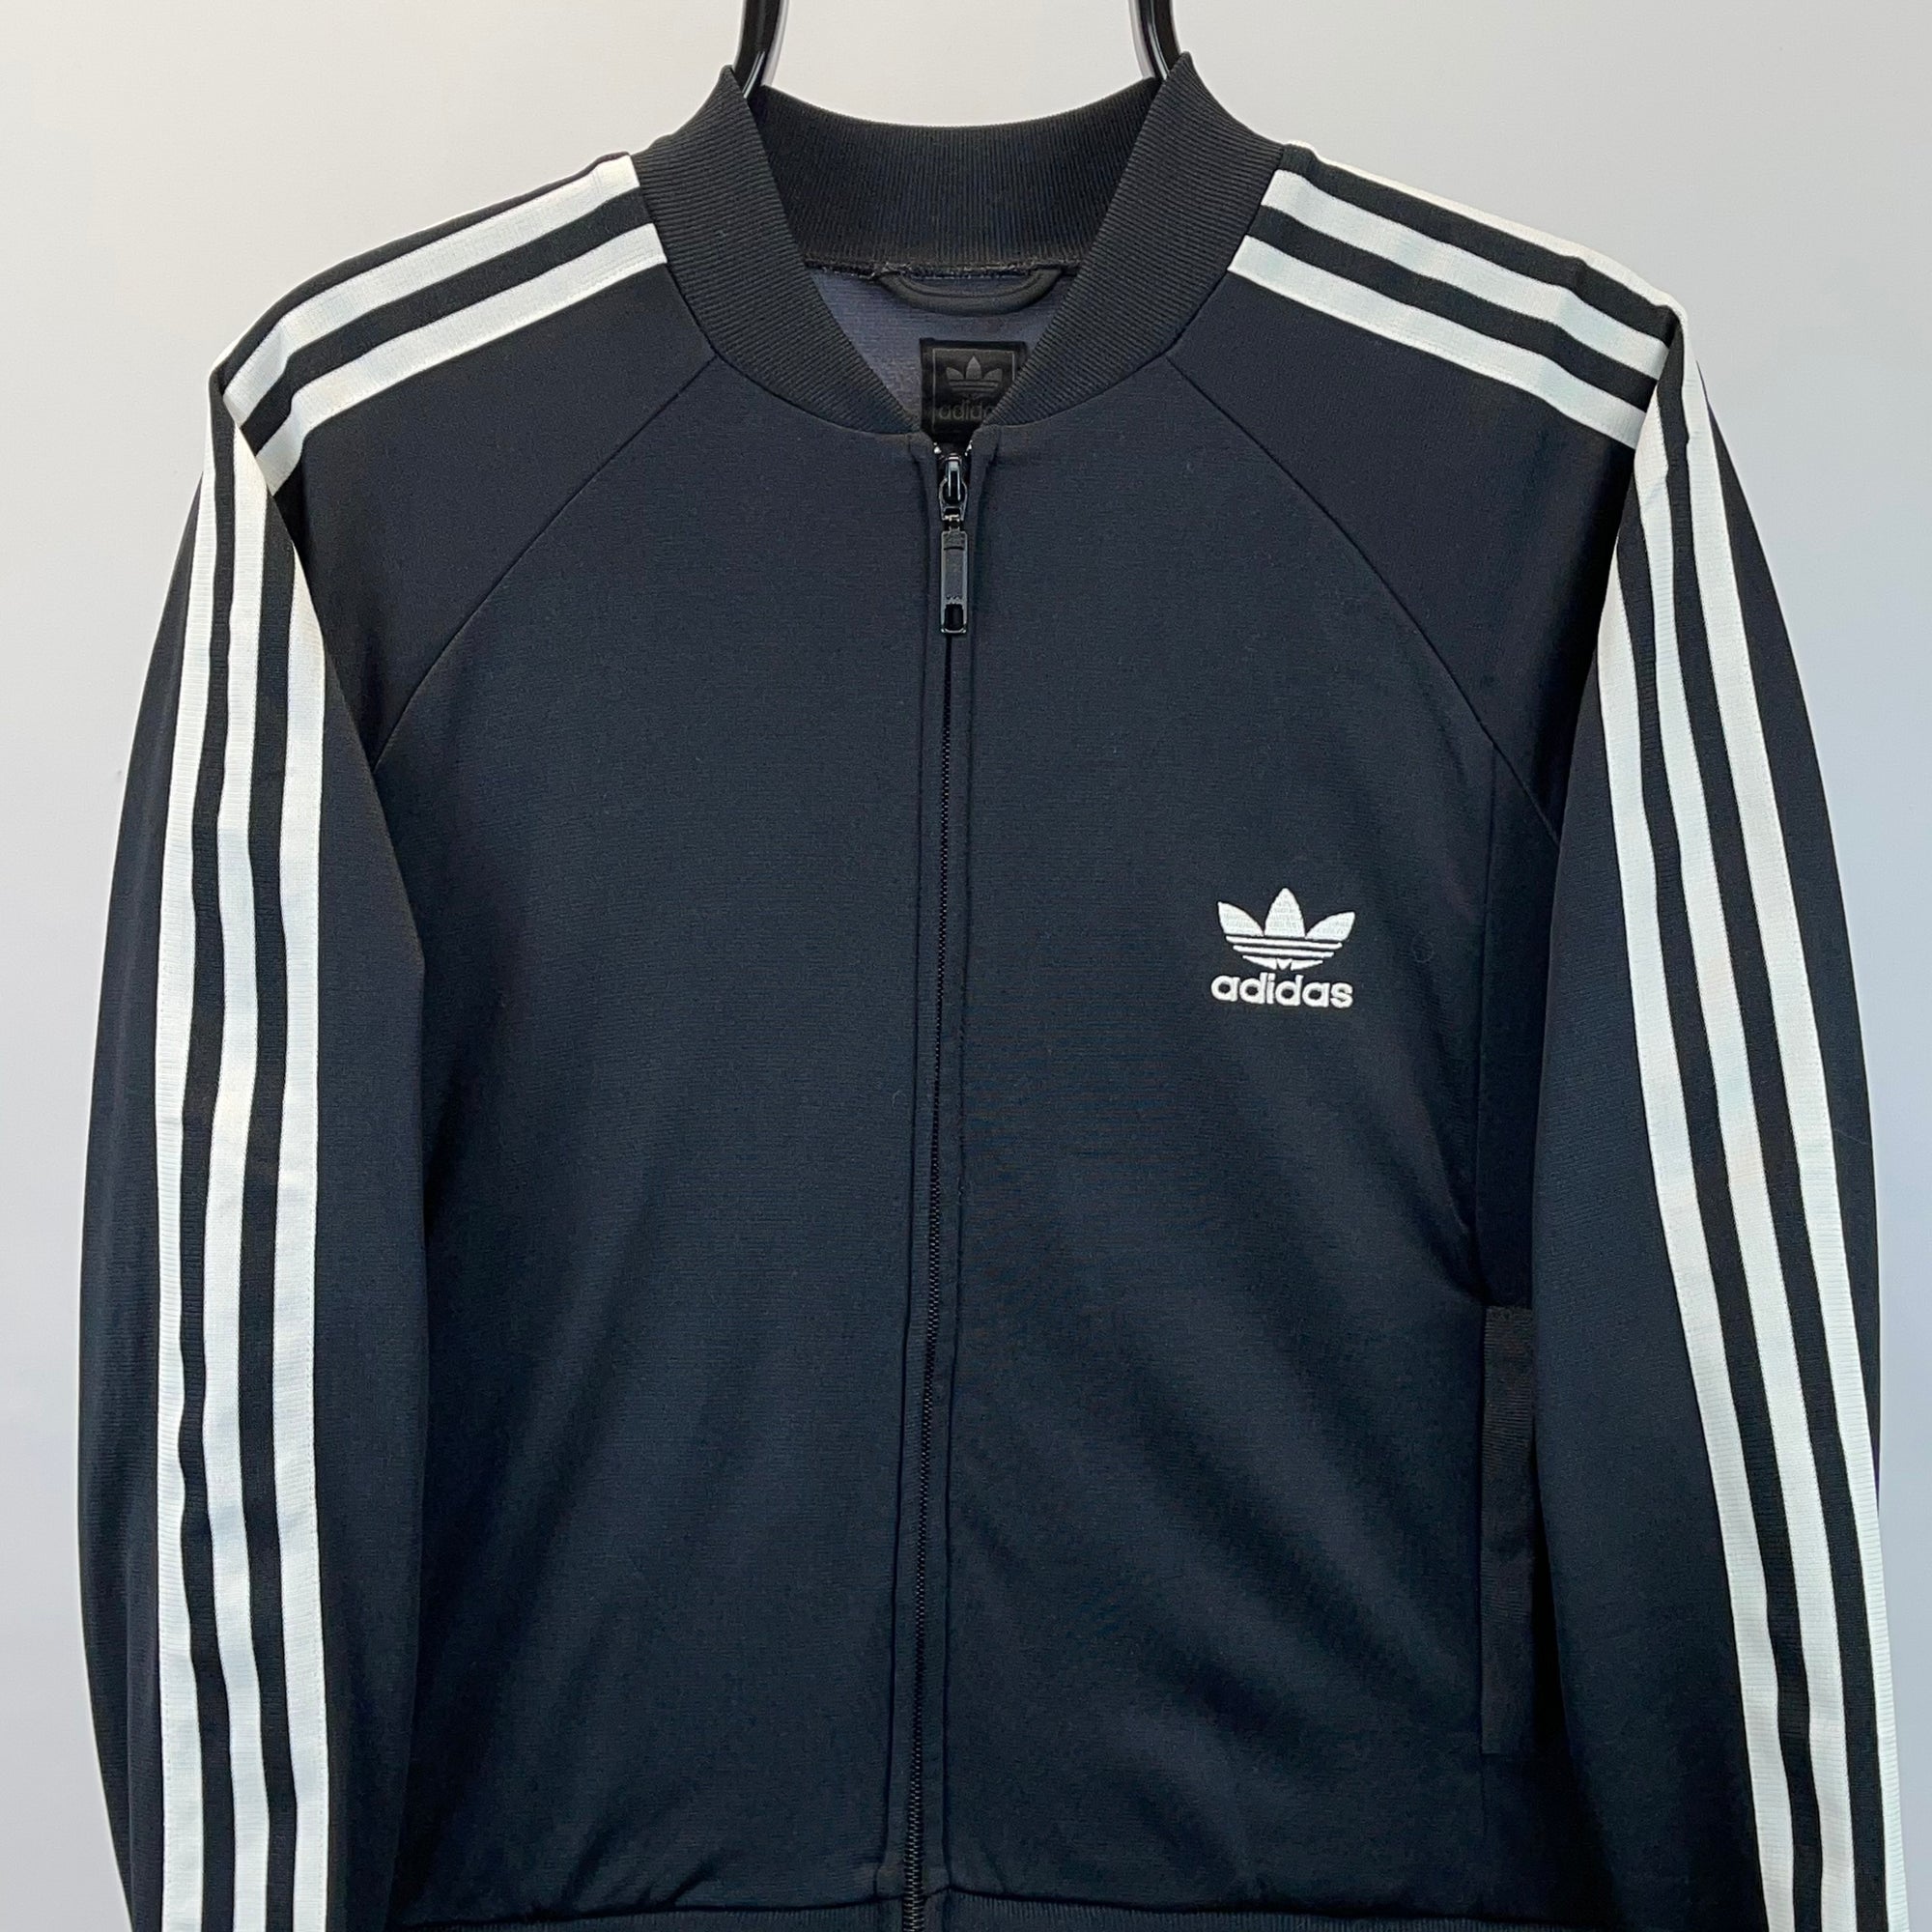 ADIDAS TRACK JACKET IN BLACK & WHITE - MEN'S XS/WOMEN'S SMALL